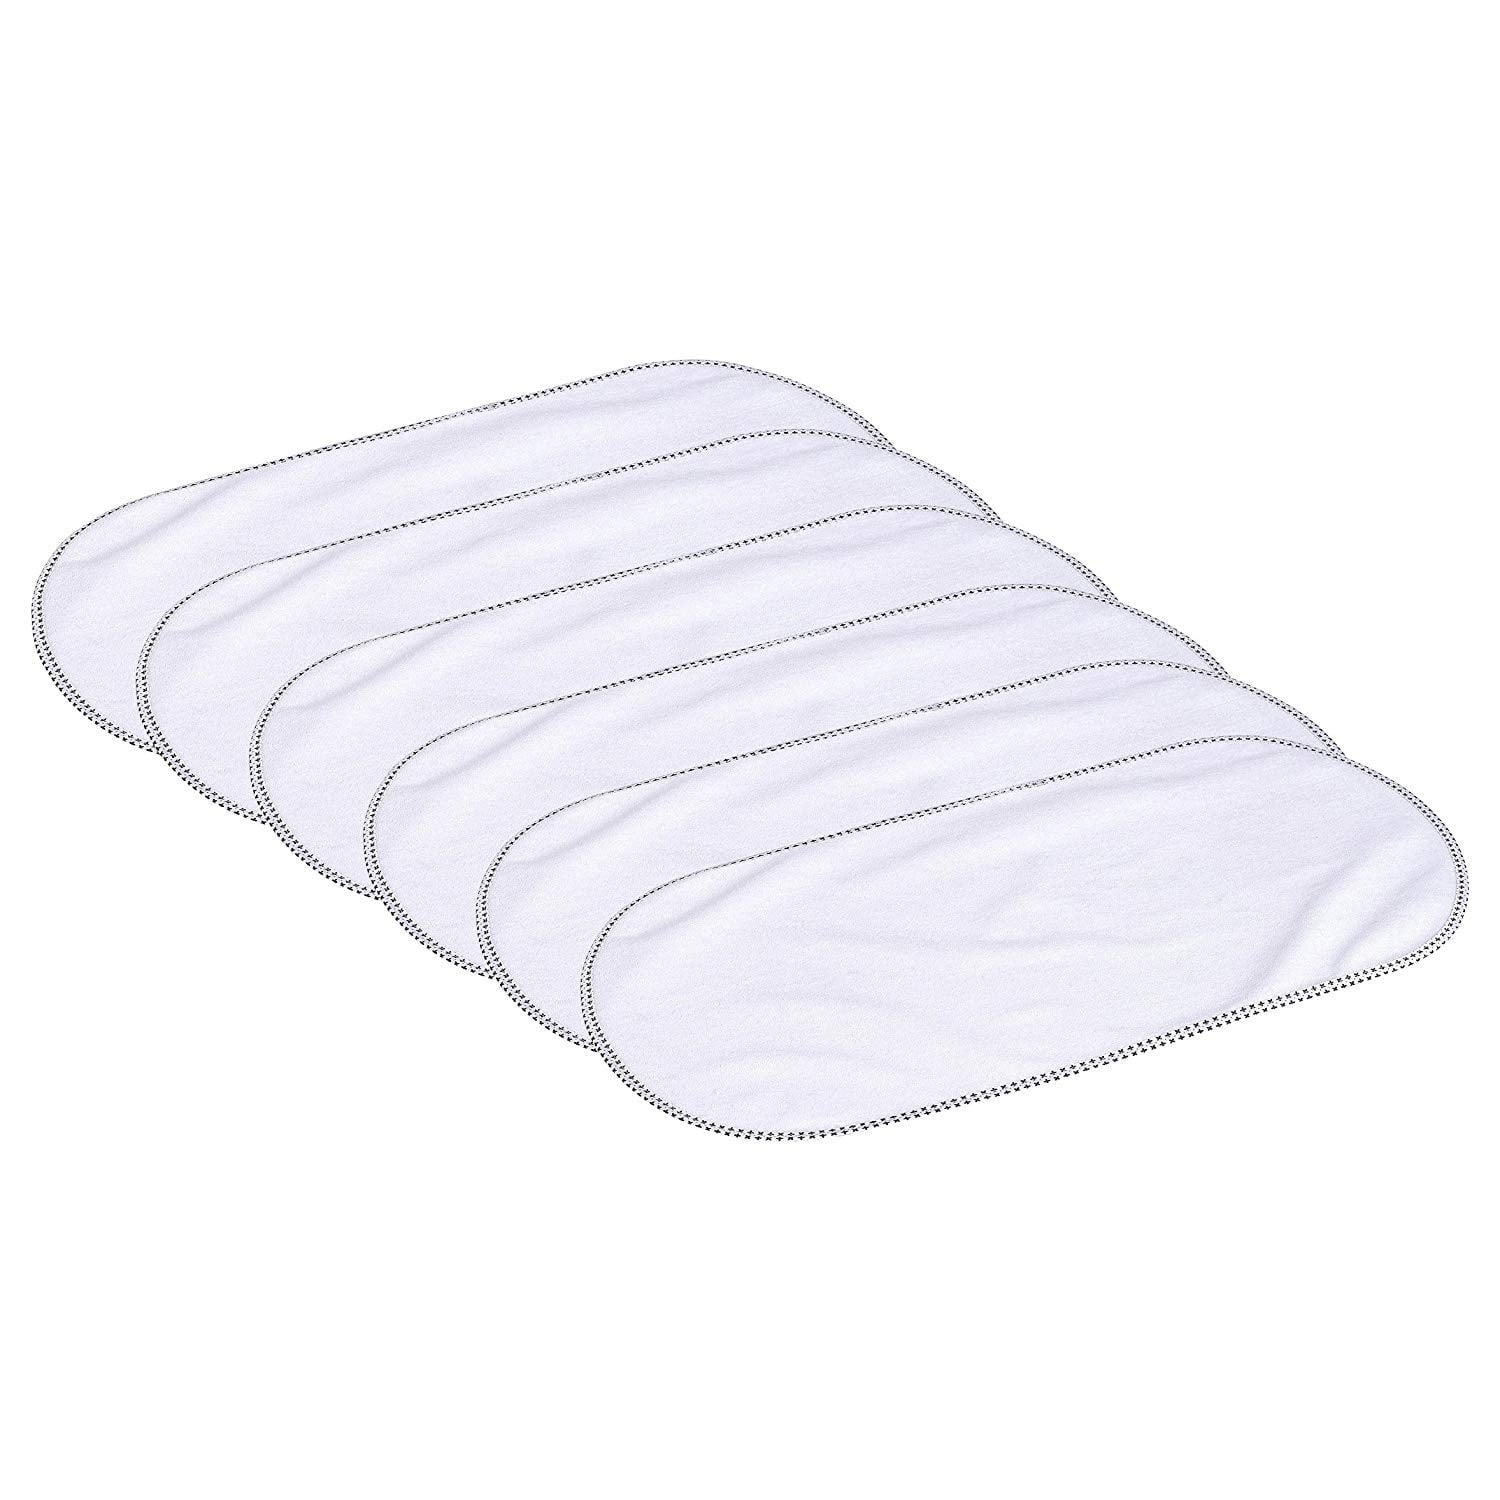 American Baby Company Waterproof Quilted Sheet Saver Changing Pad Liner Made